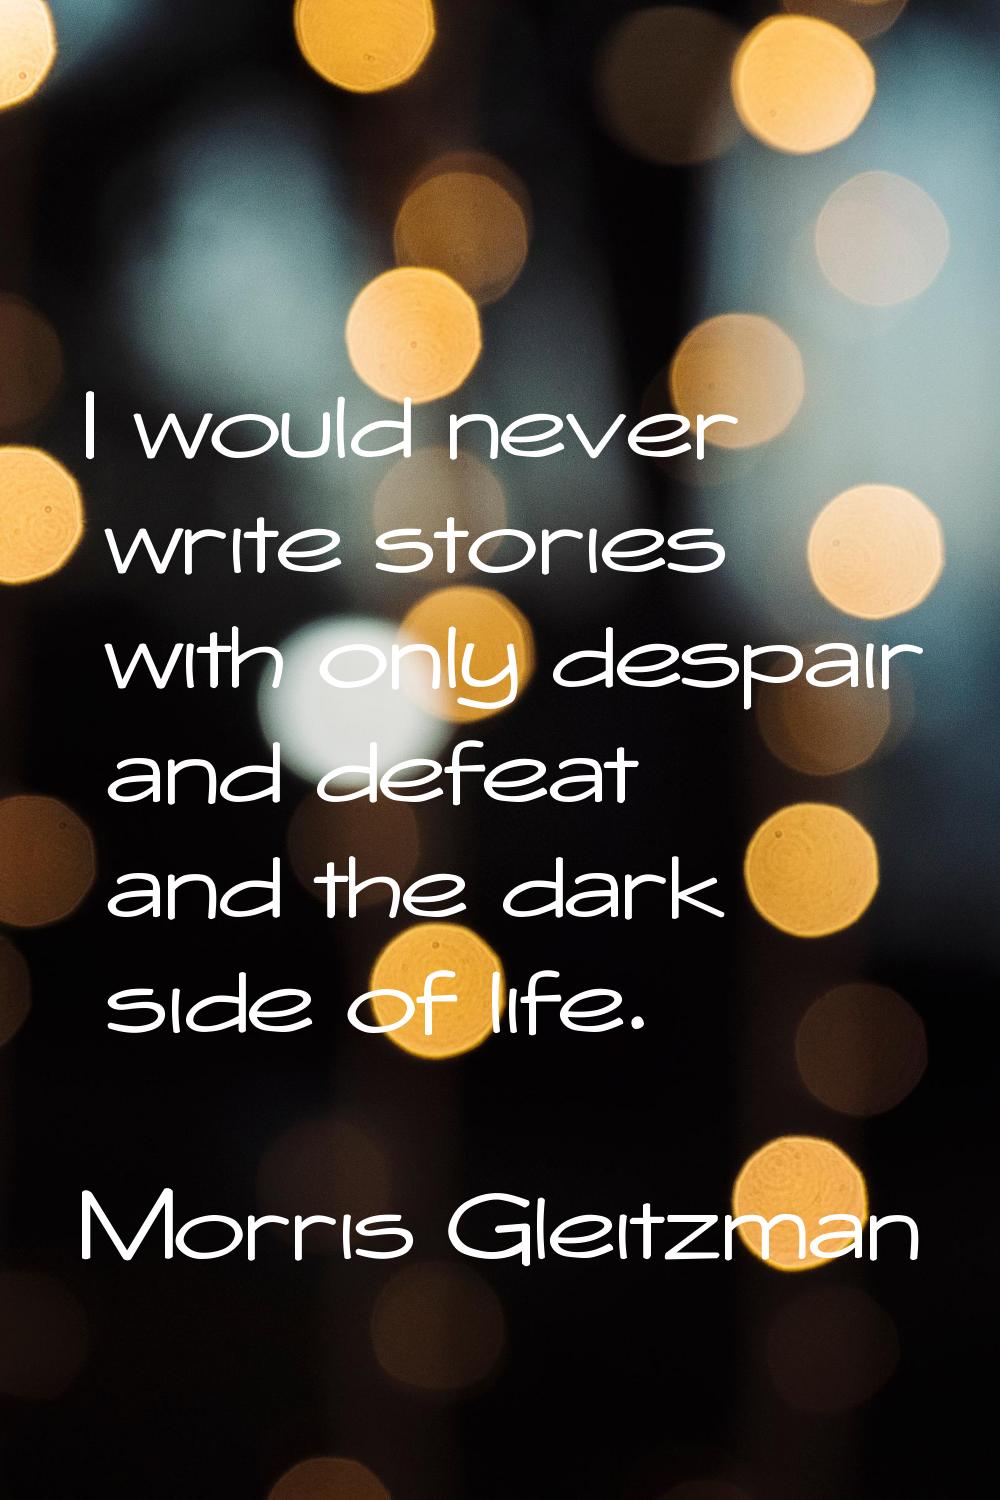 I would never write stories with only despair and defeat and the dark side of life.